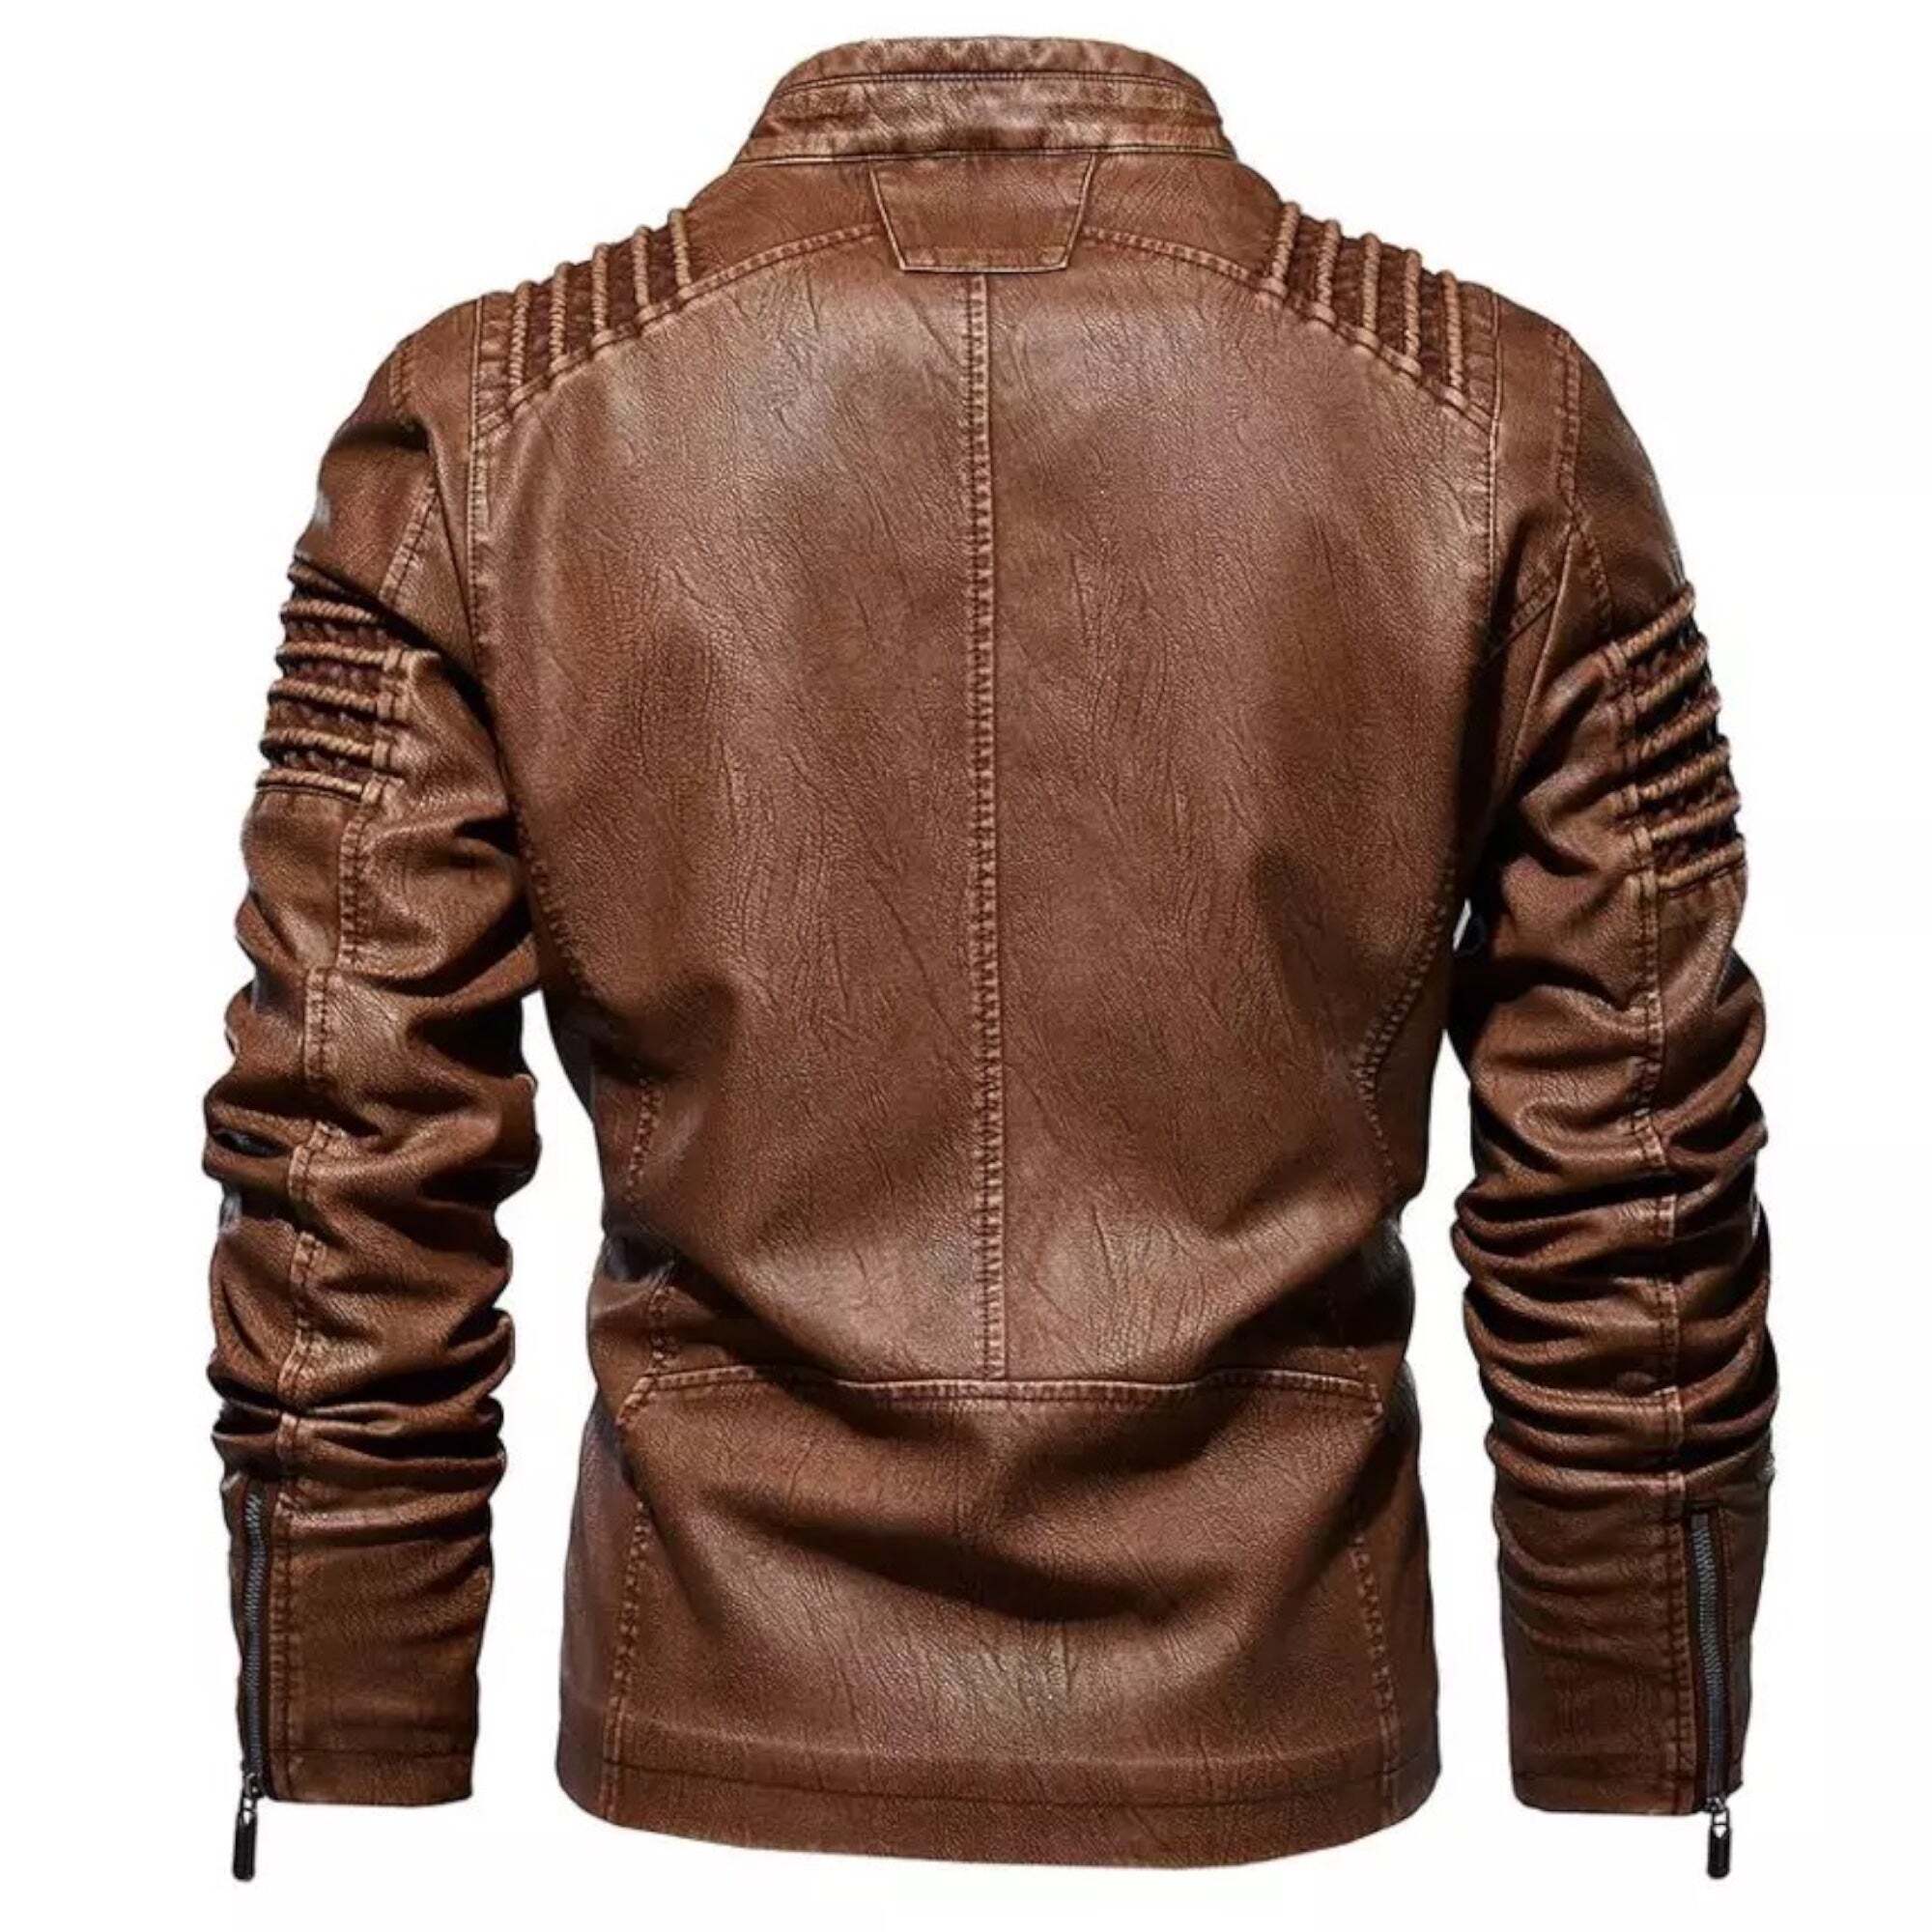 'Holy Grail' Leather Jacket